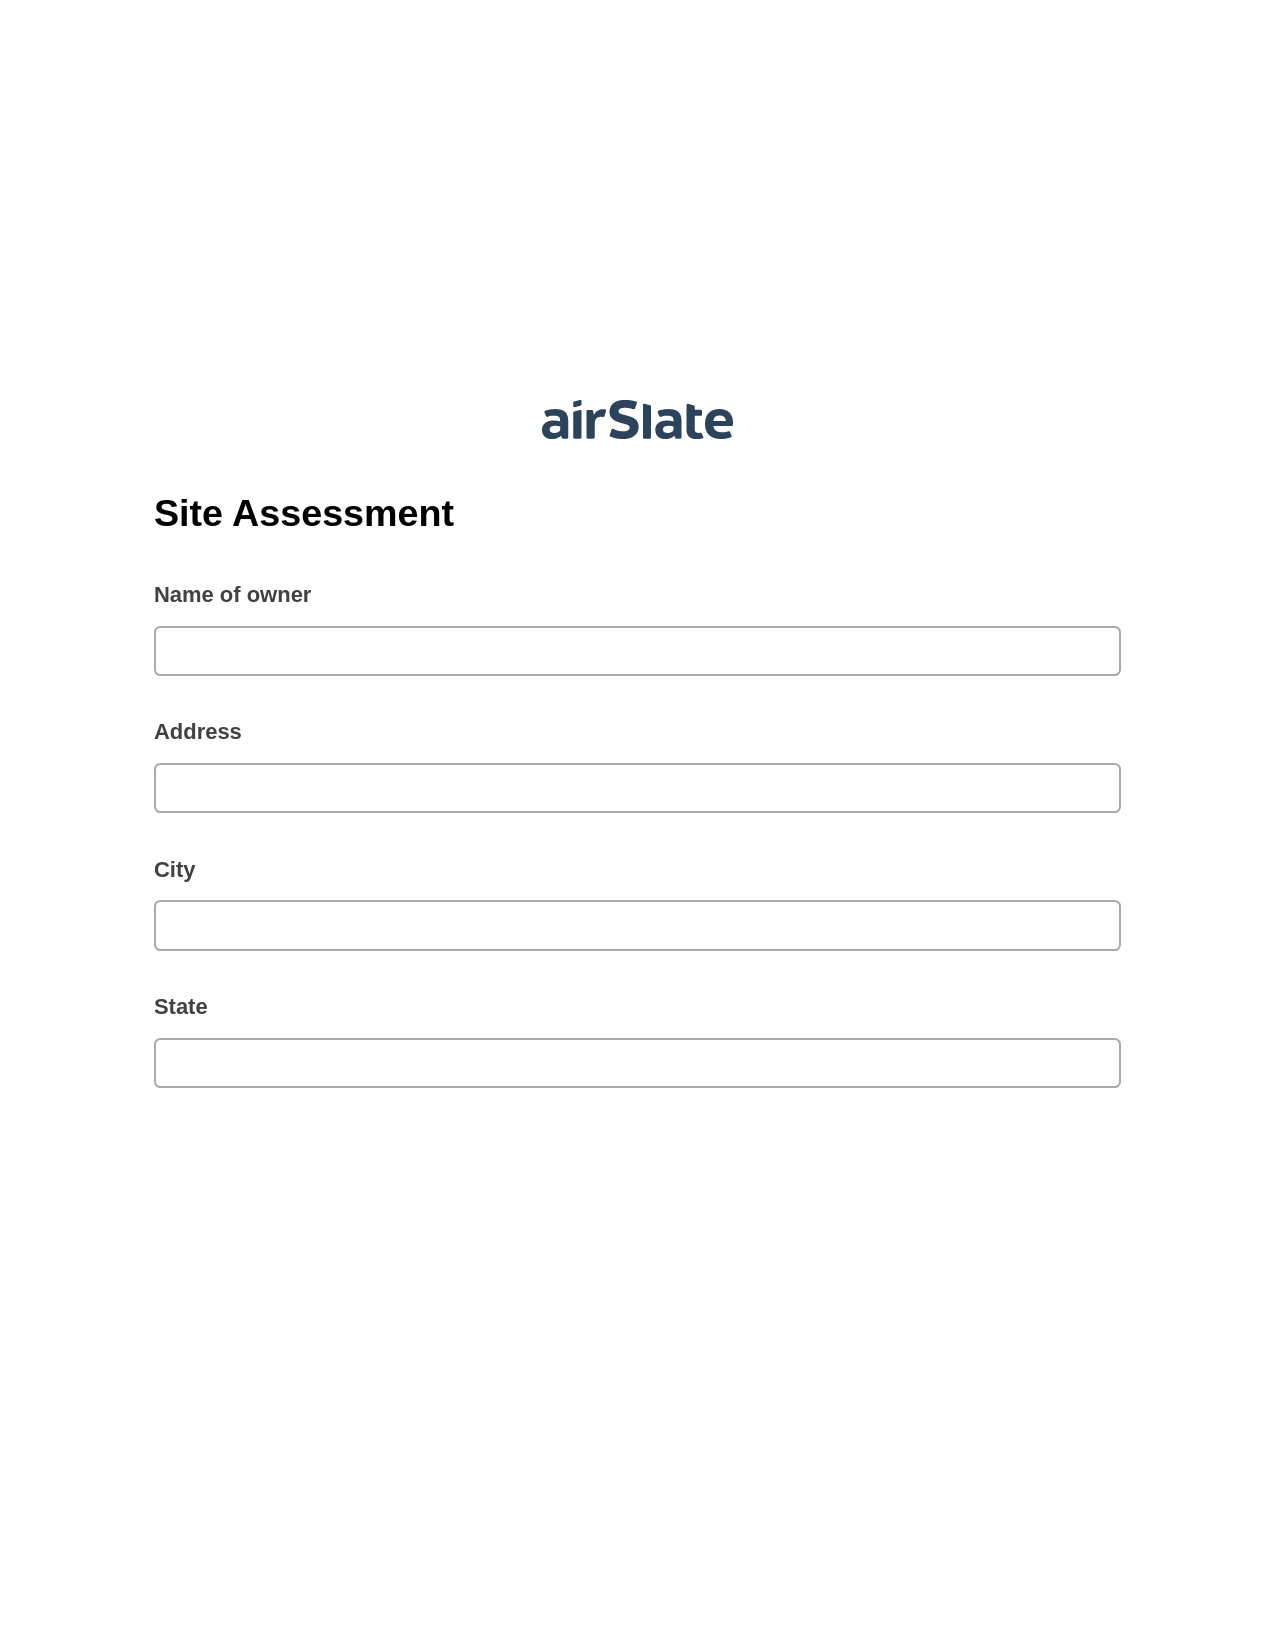 Multirole Site Assessment Pre-fill from CSV File Bot, Assign Slate Name Bot, Export to Excel 365 Bot